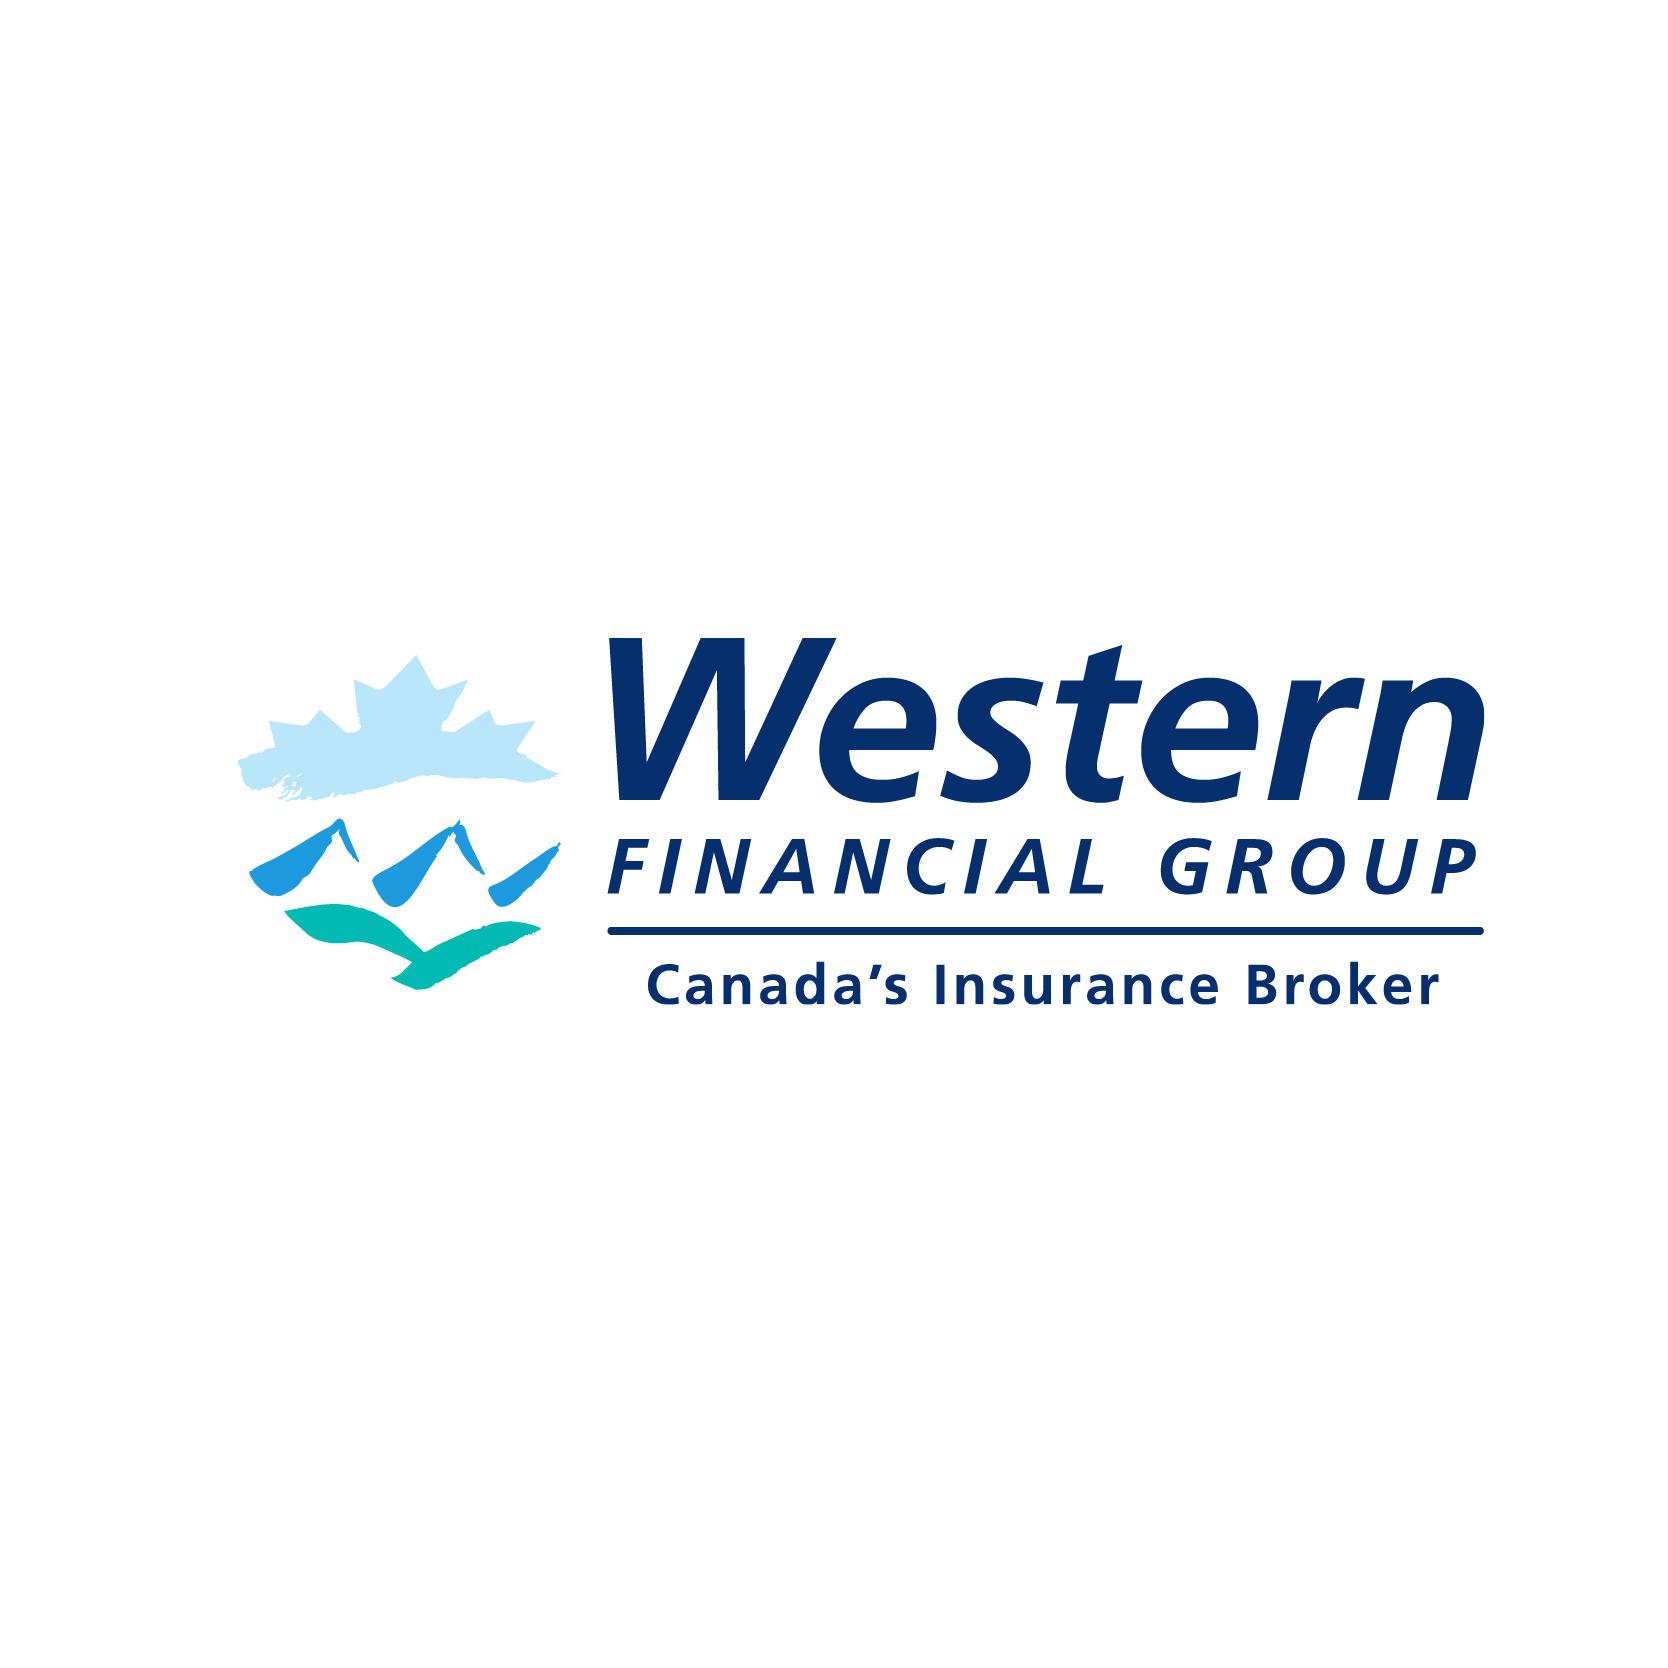 Western Financial Group (formerly known as Orr & Associates Insurance Brokers)